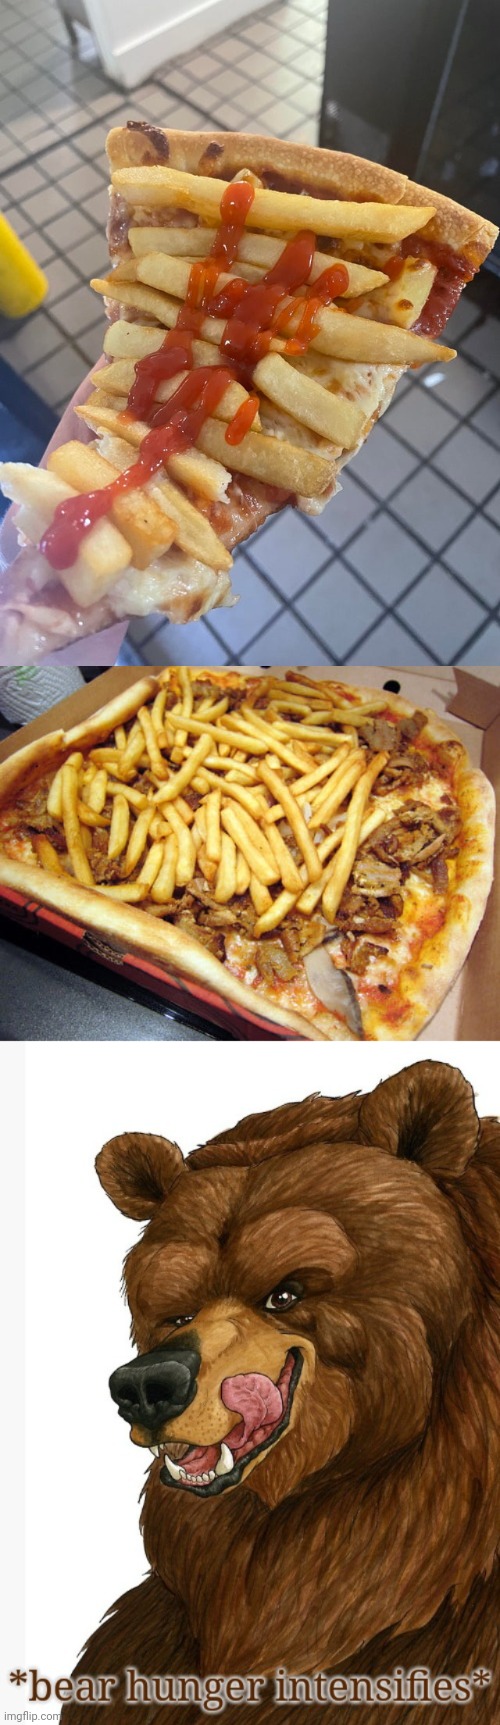 Pizzas | image tagged in bear hunger intensifies,french fries,pizzas,memes,foods,food | made w/ Imgflip meme maker